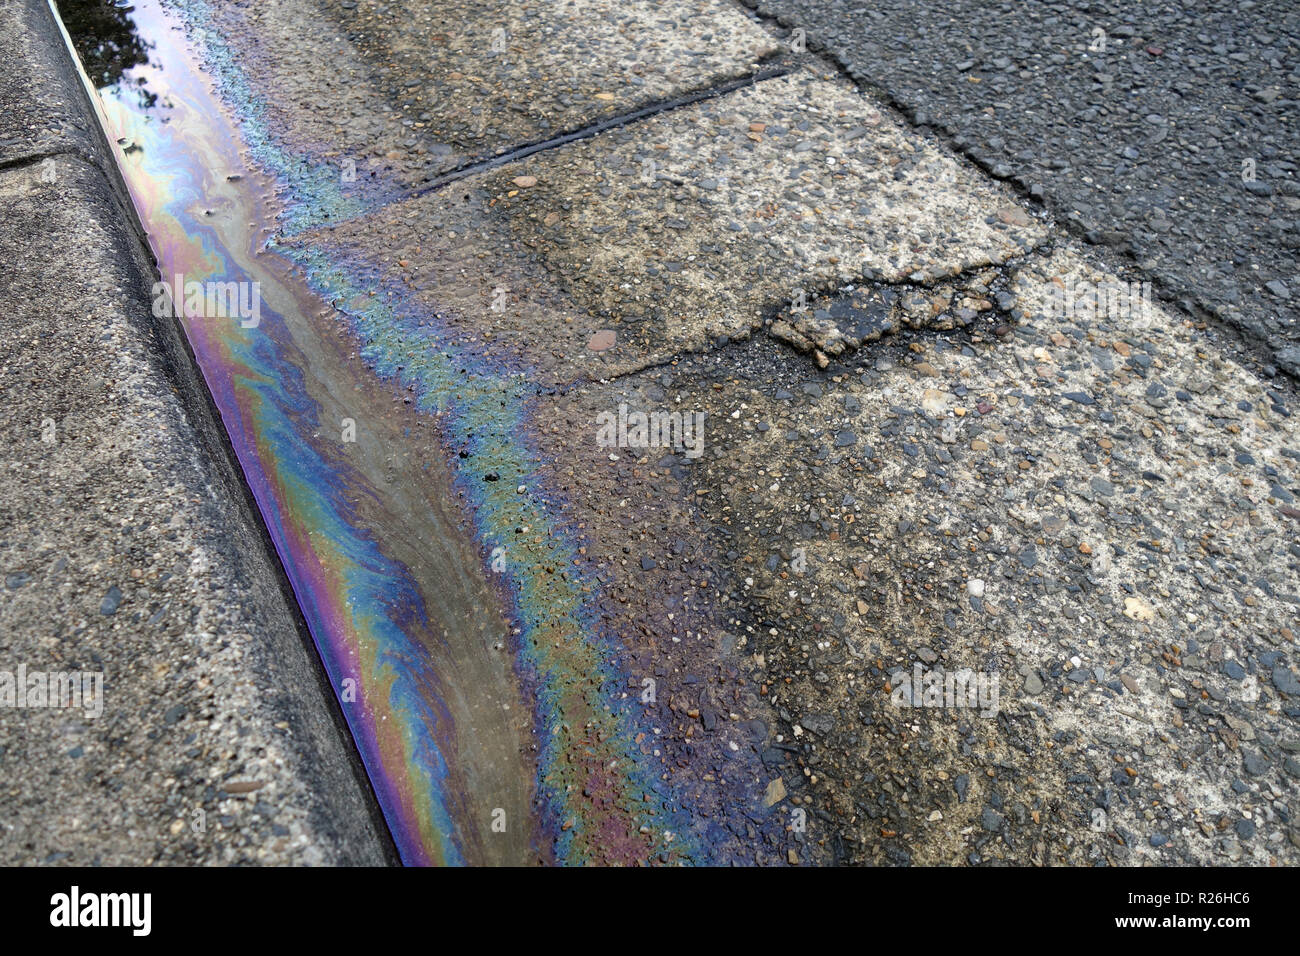 Petrochemical pollution in street gutter Stock Photo